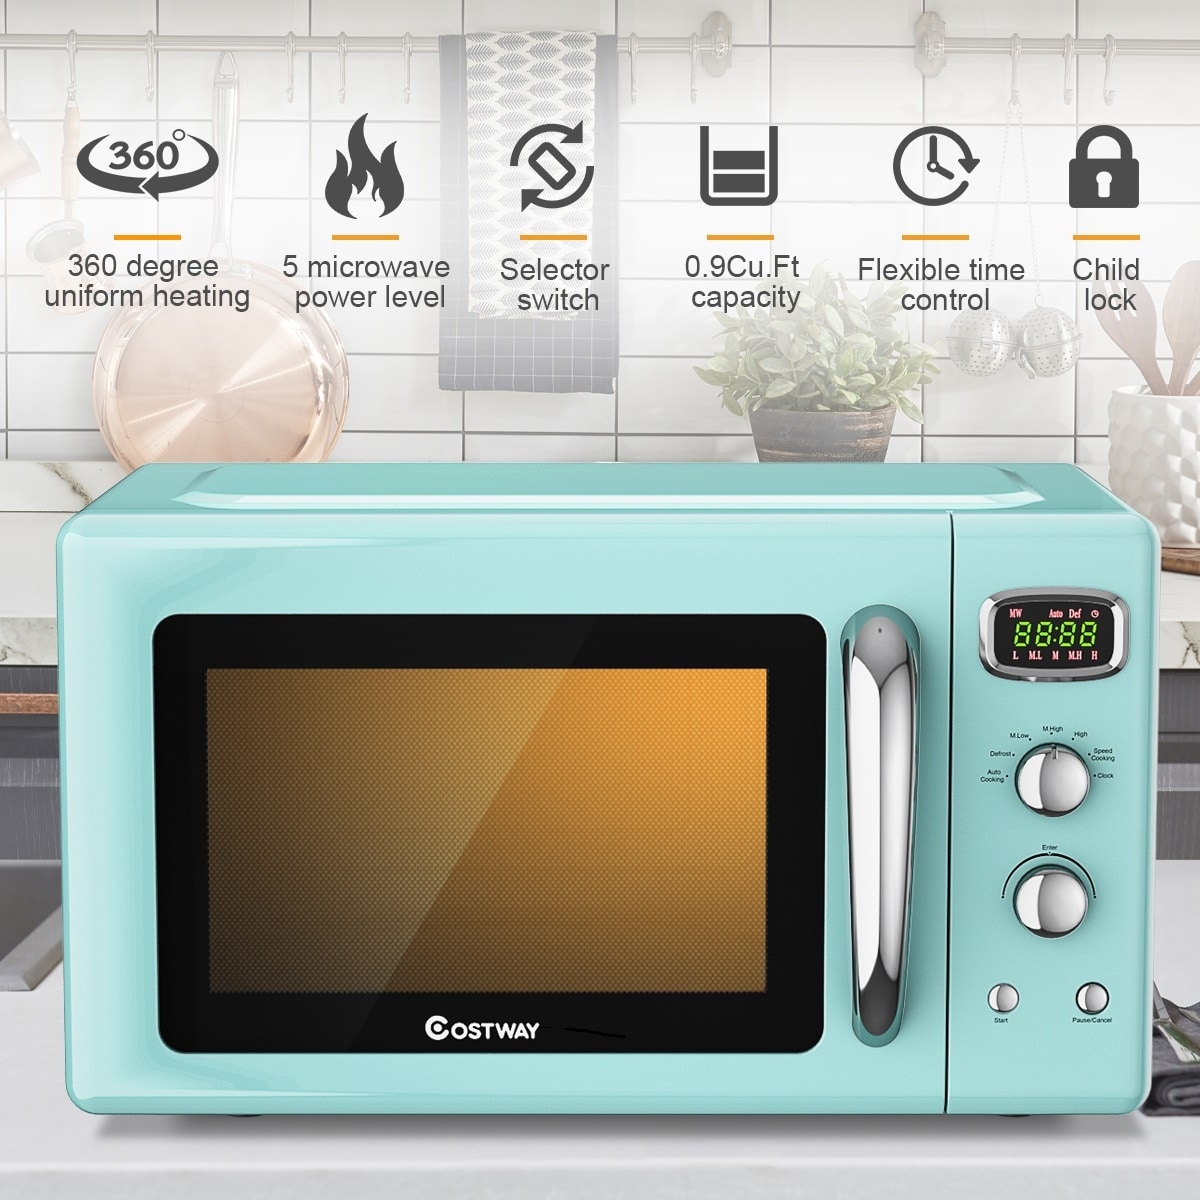 https://ak1.ostkcdn.com/images/products/is/images/direct/5e703cbec9affbcd304e24fbb0fa68d0d4bc9db1/Costway-0.9Cu.ft.-Retro-Countertop-Compact-Microwave-Oven-900W-8.jpg